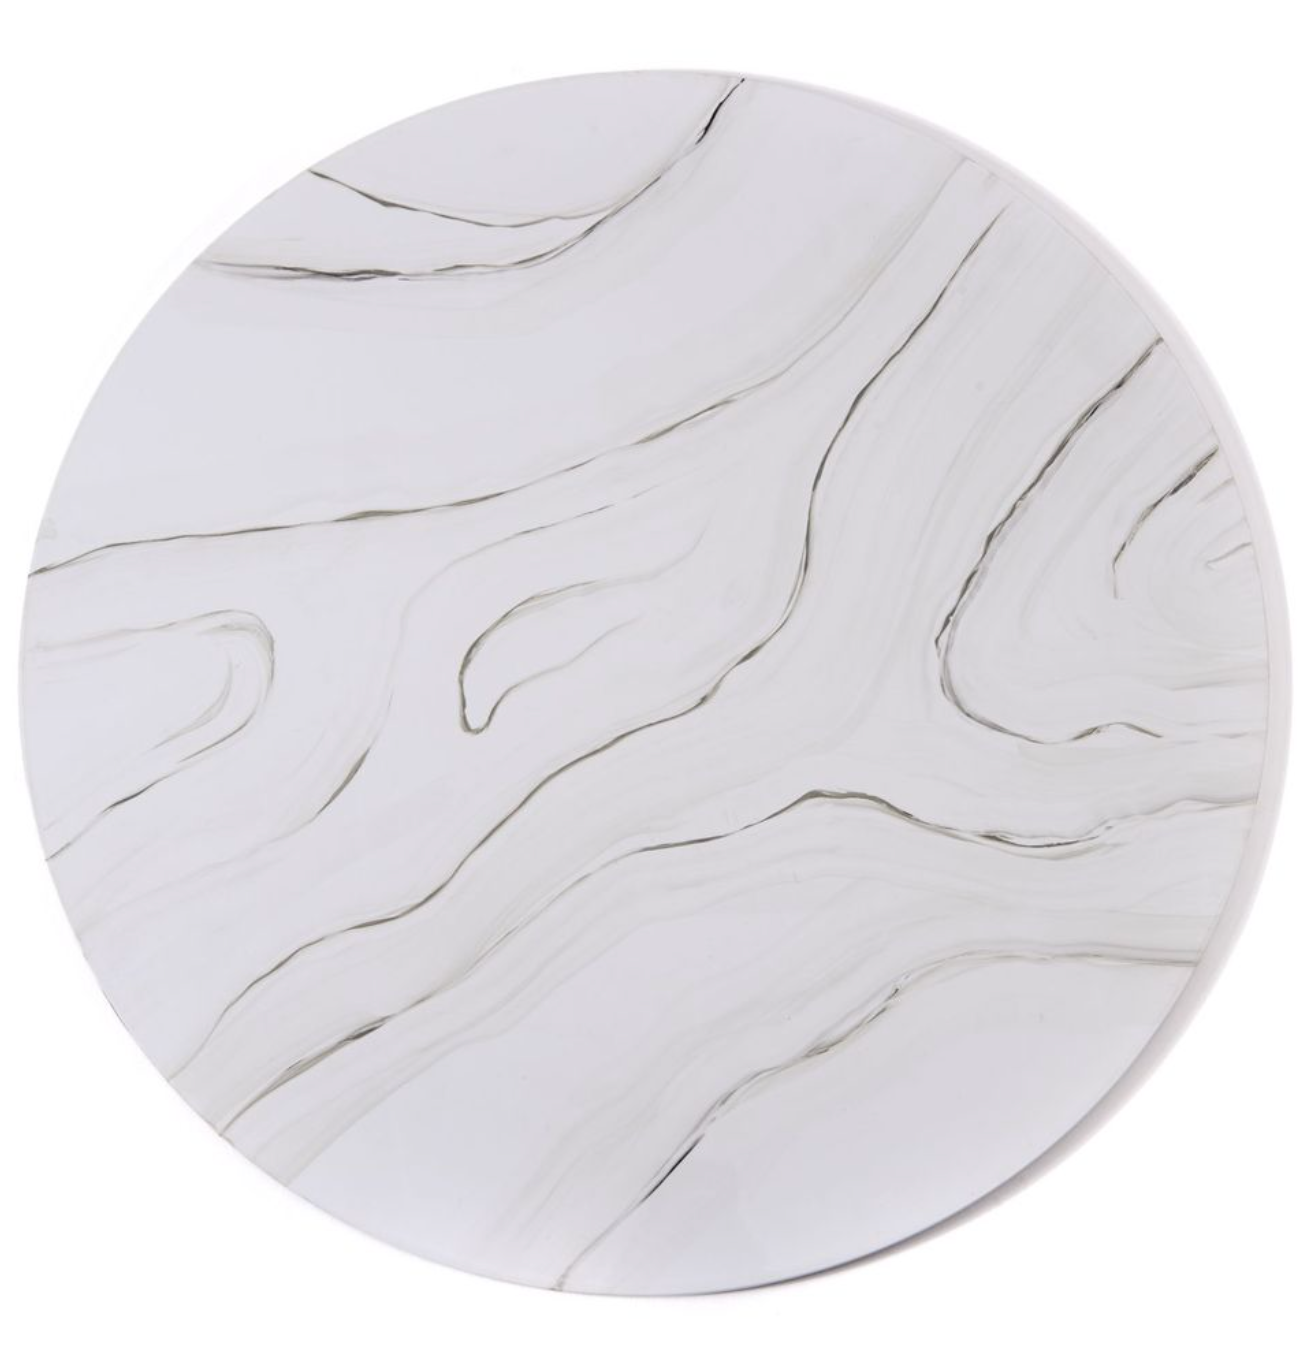 Swirled Lacquer Placemat